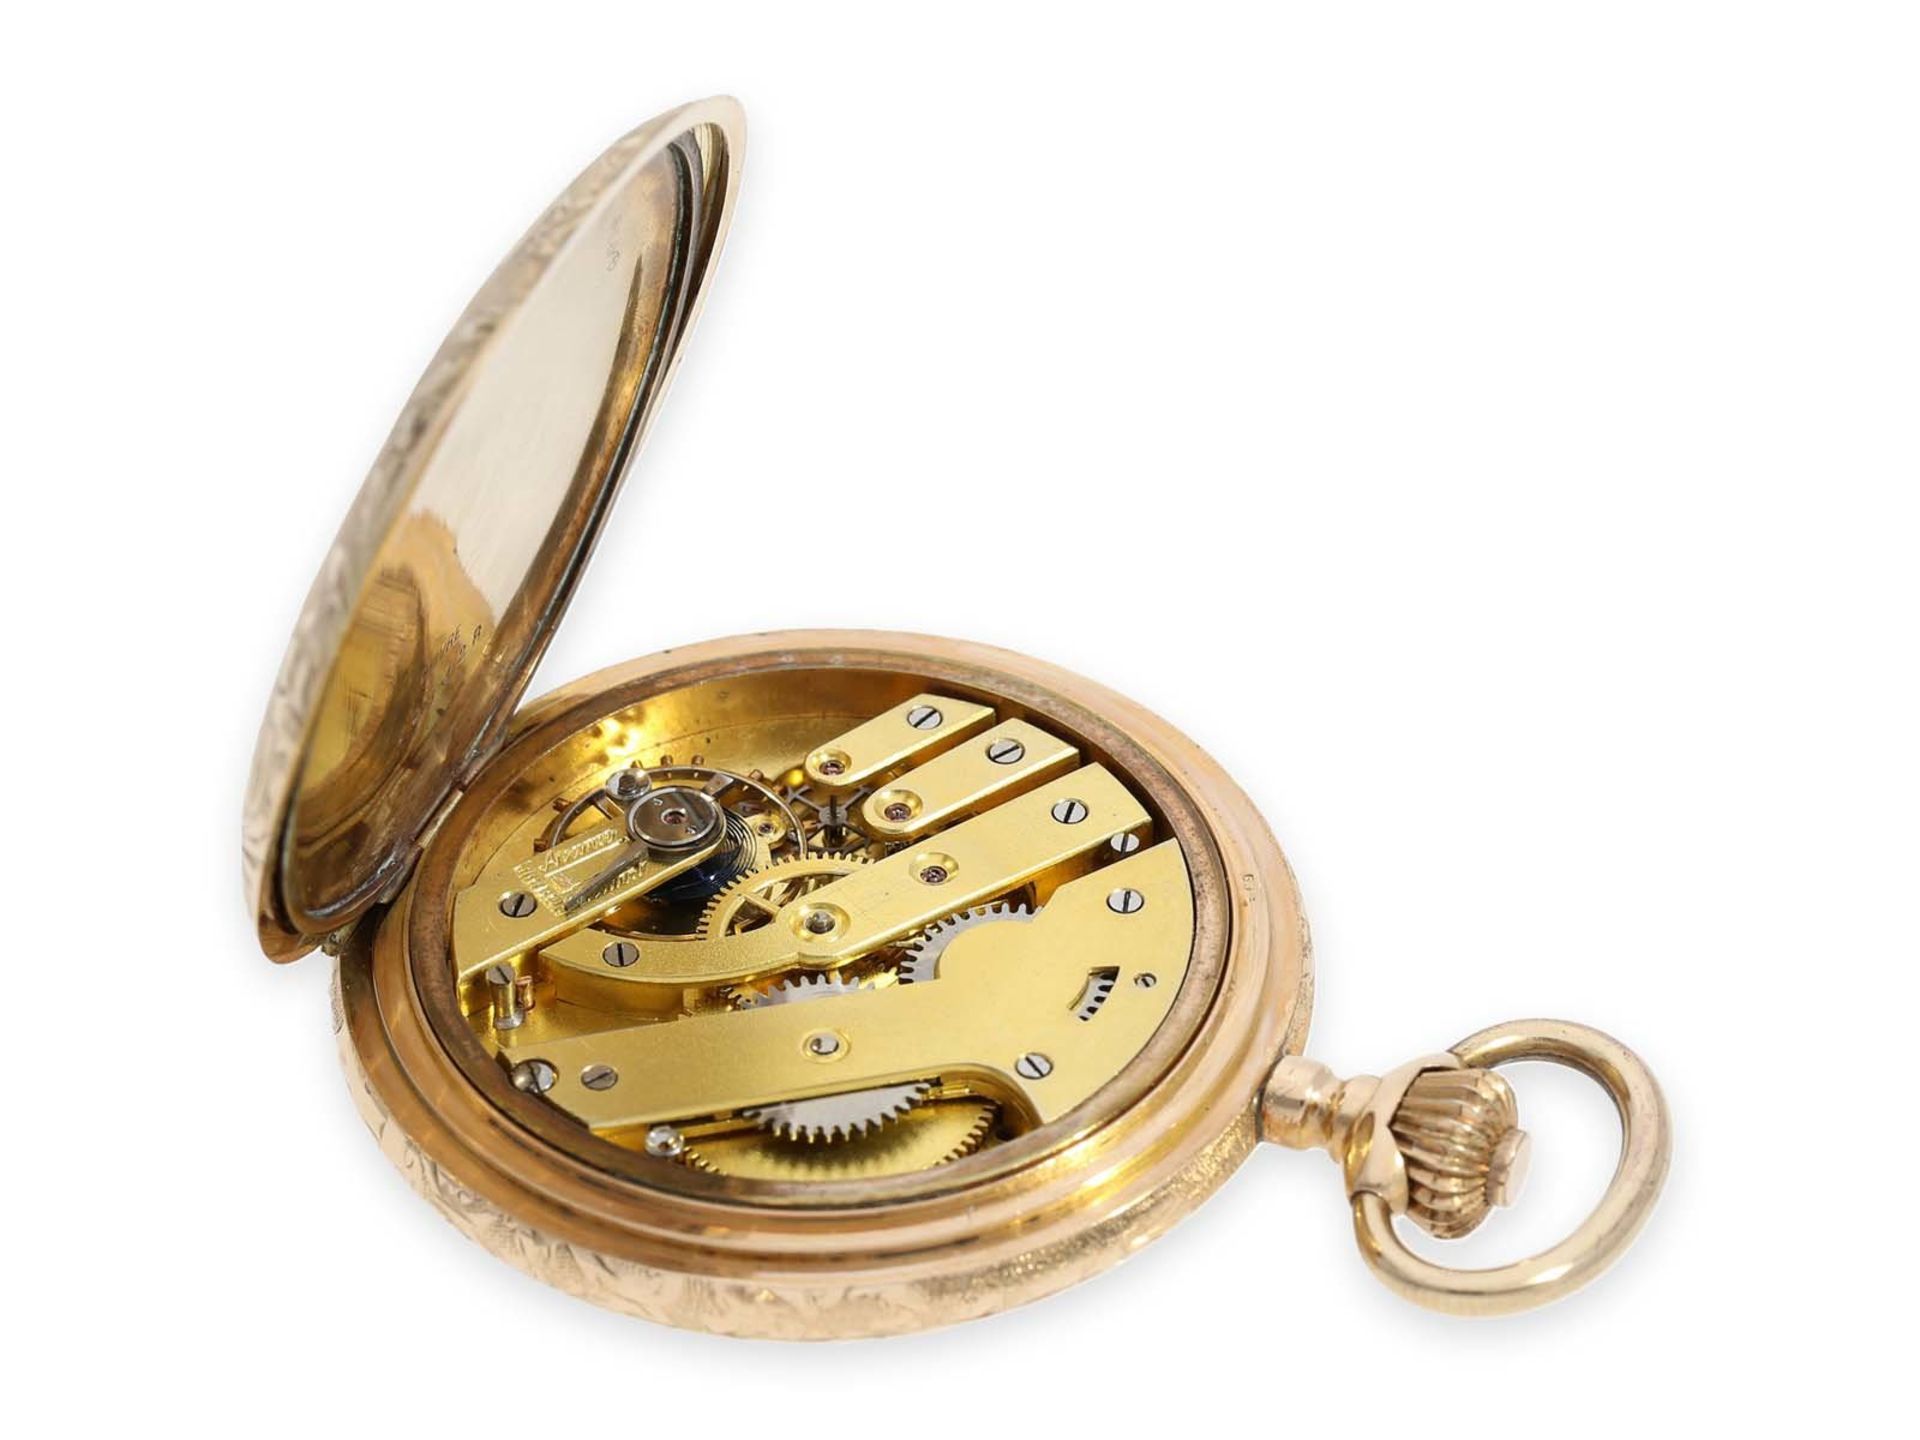 Pocket watch: pink gold Art Nouveau splendour hunting case watch with fine quality case, Switzerland - Image 3 of 7